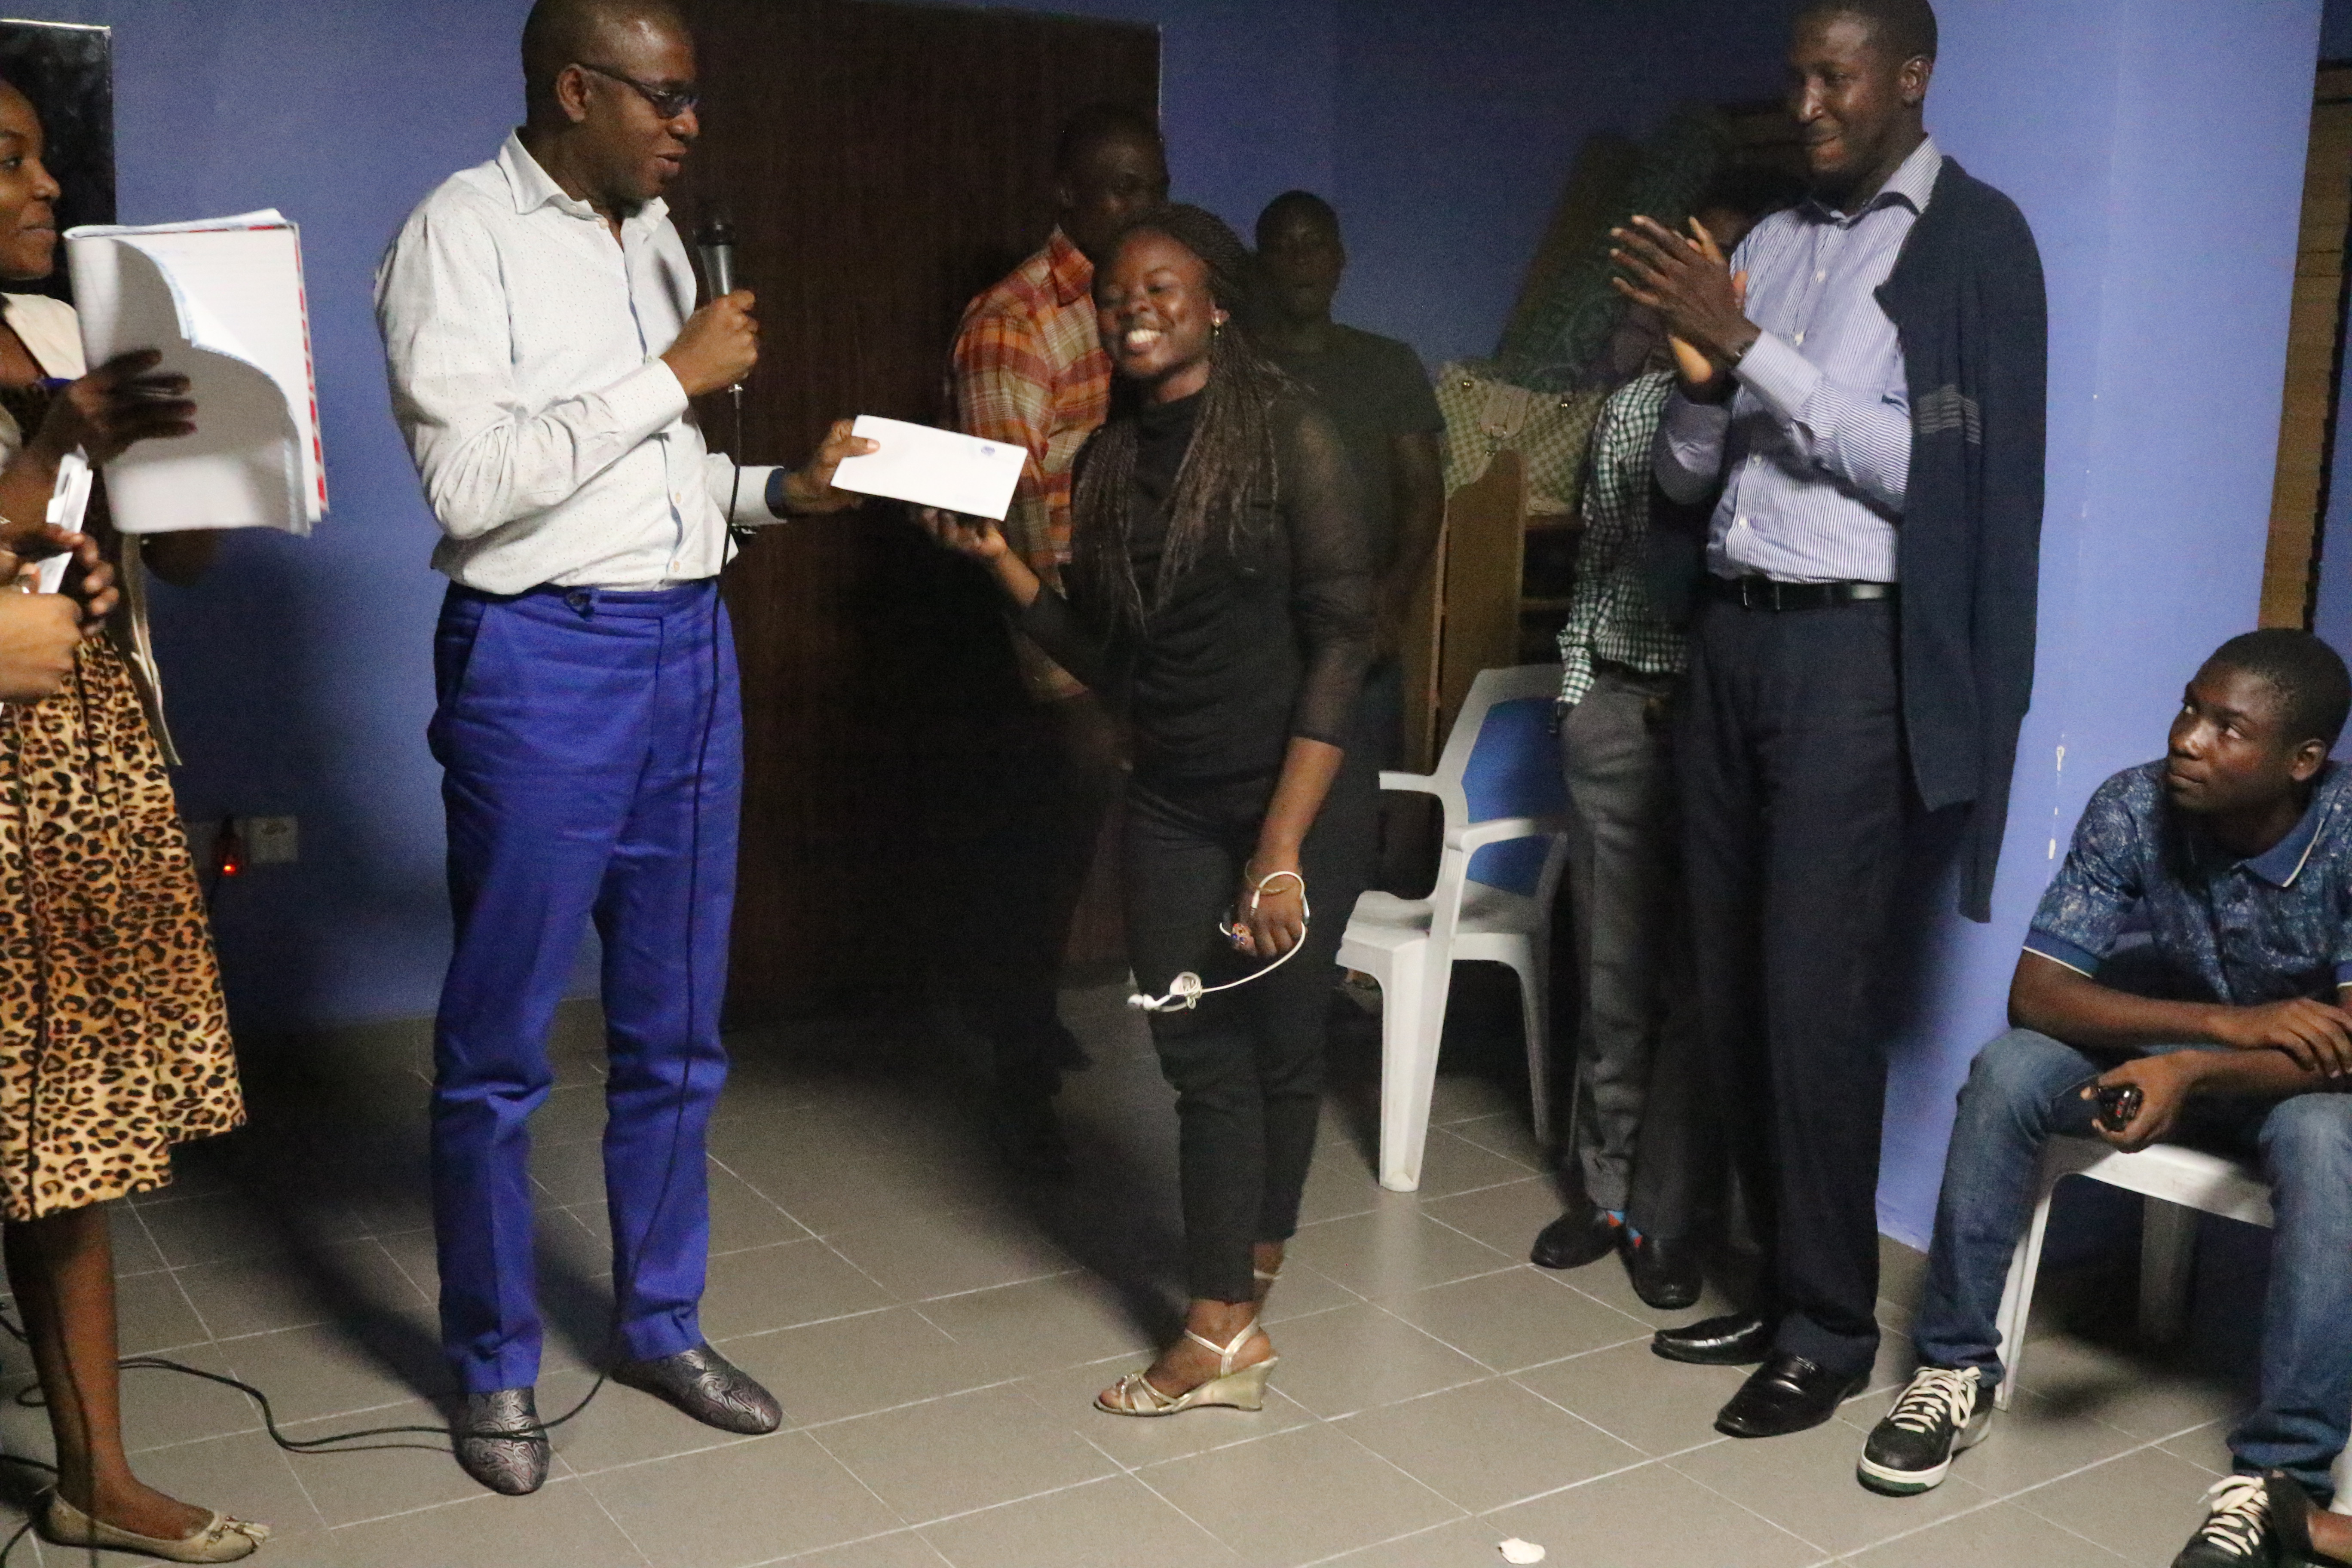 Nifemi Kolawole, Winner of the first prize during the second edition held in October. Bob Marley's Redemption Song won her the coveted highly position